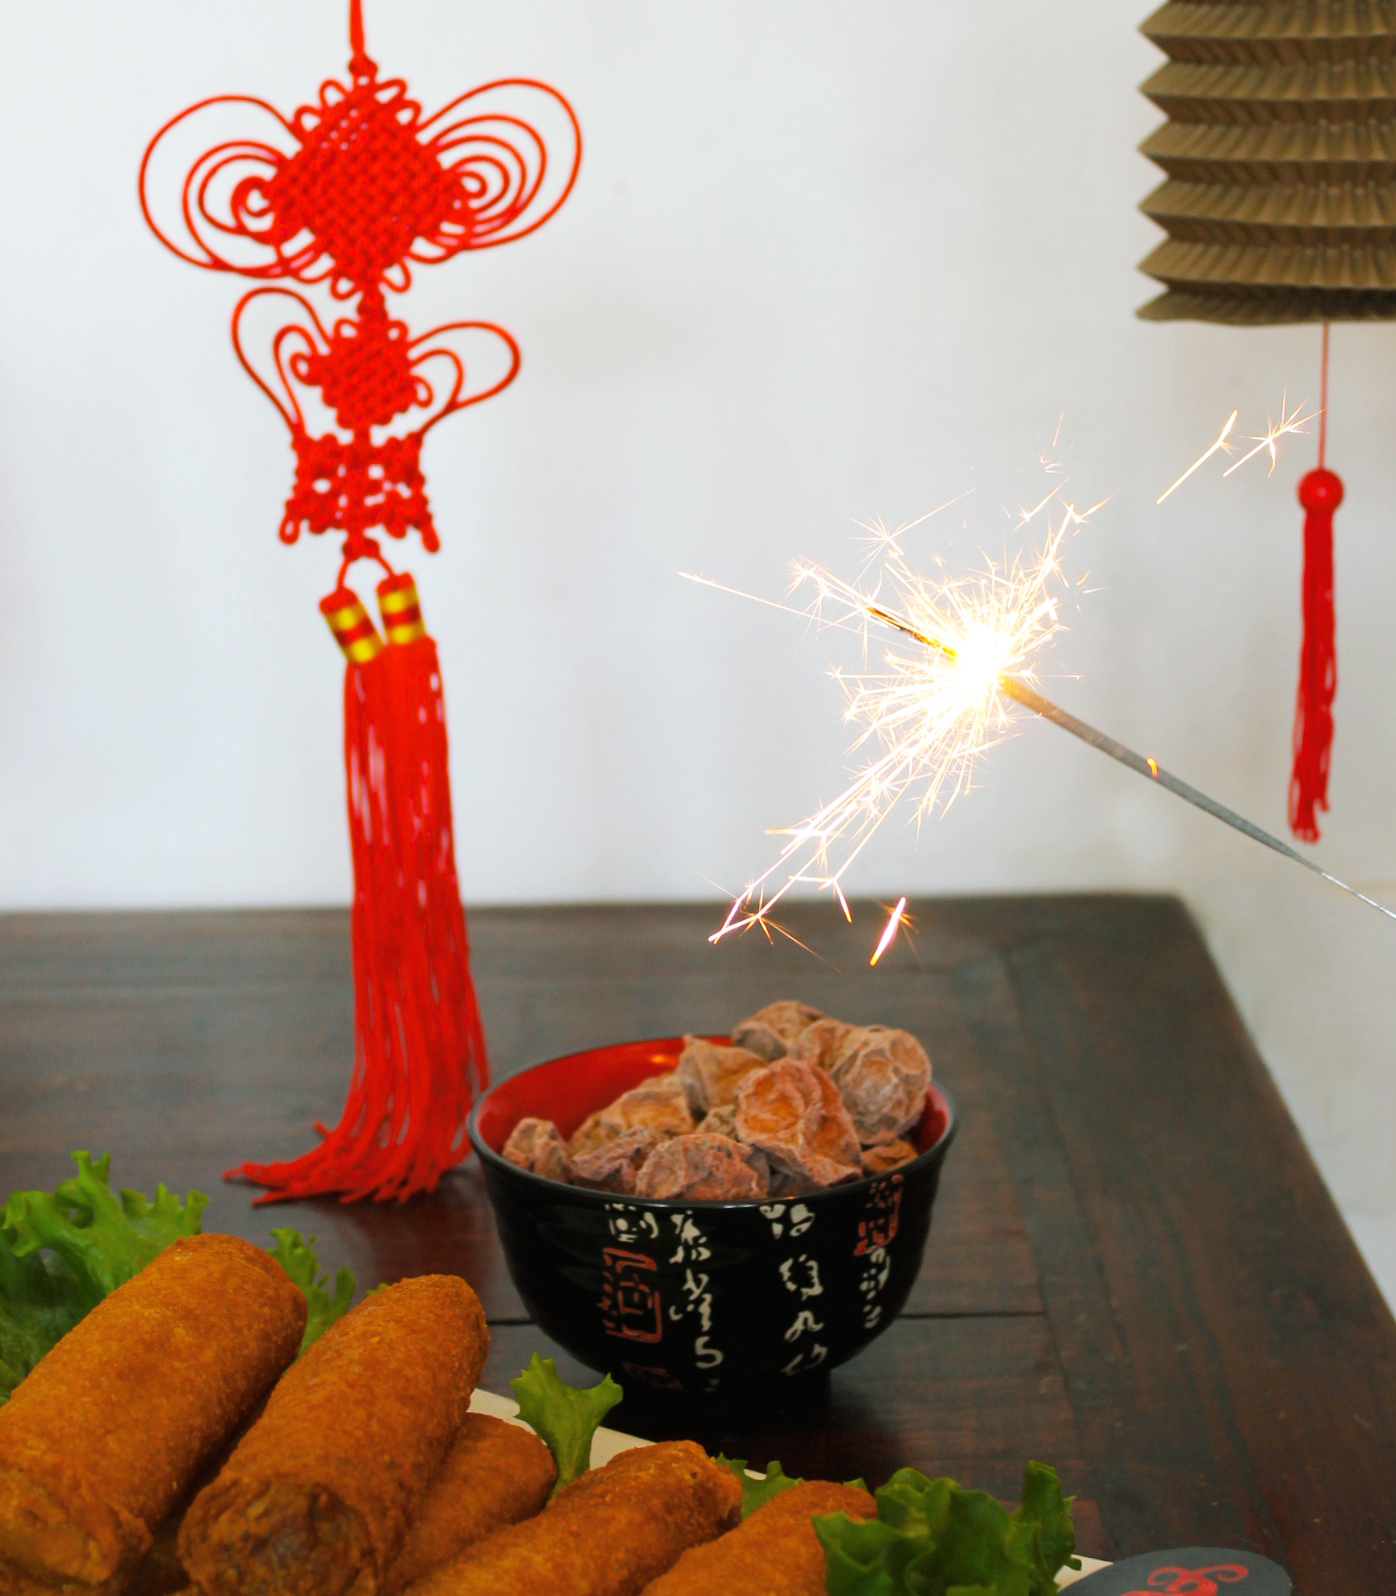 How to Plan a Gorgeous Chinese New Year Party - Make Life Lovely